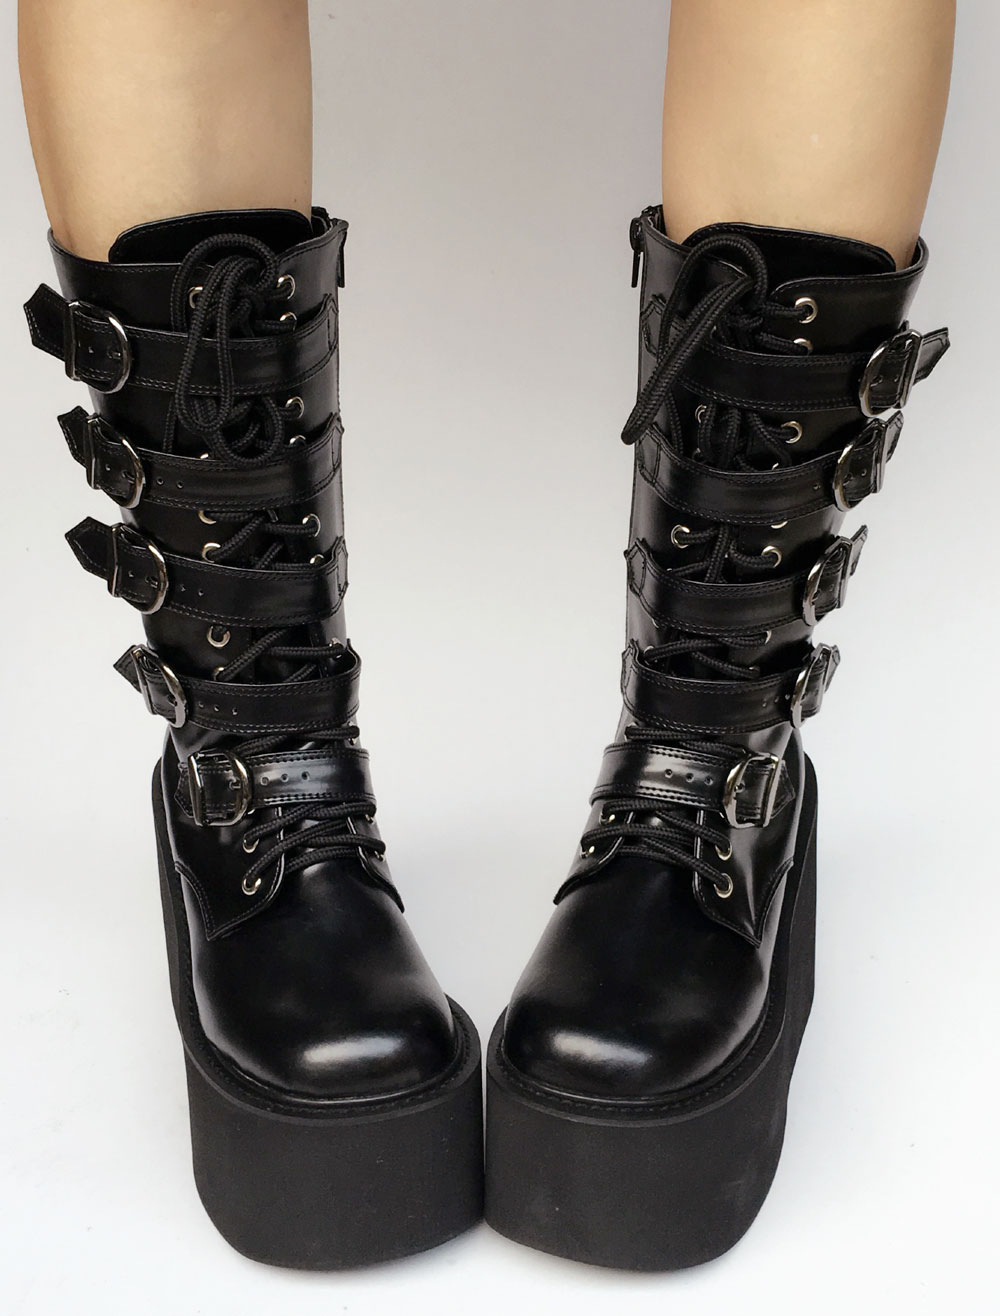 short black boots with buckles